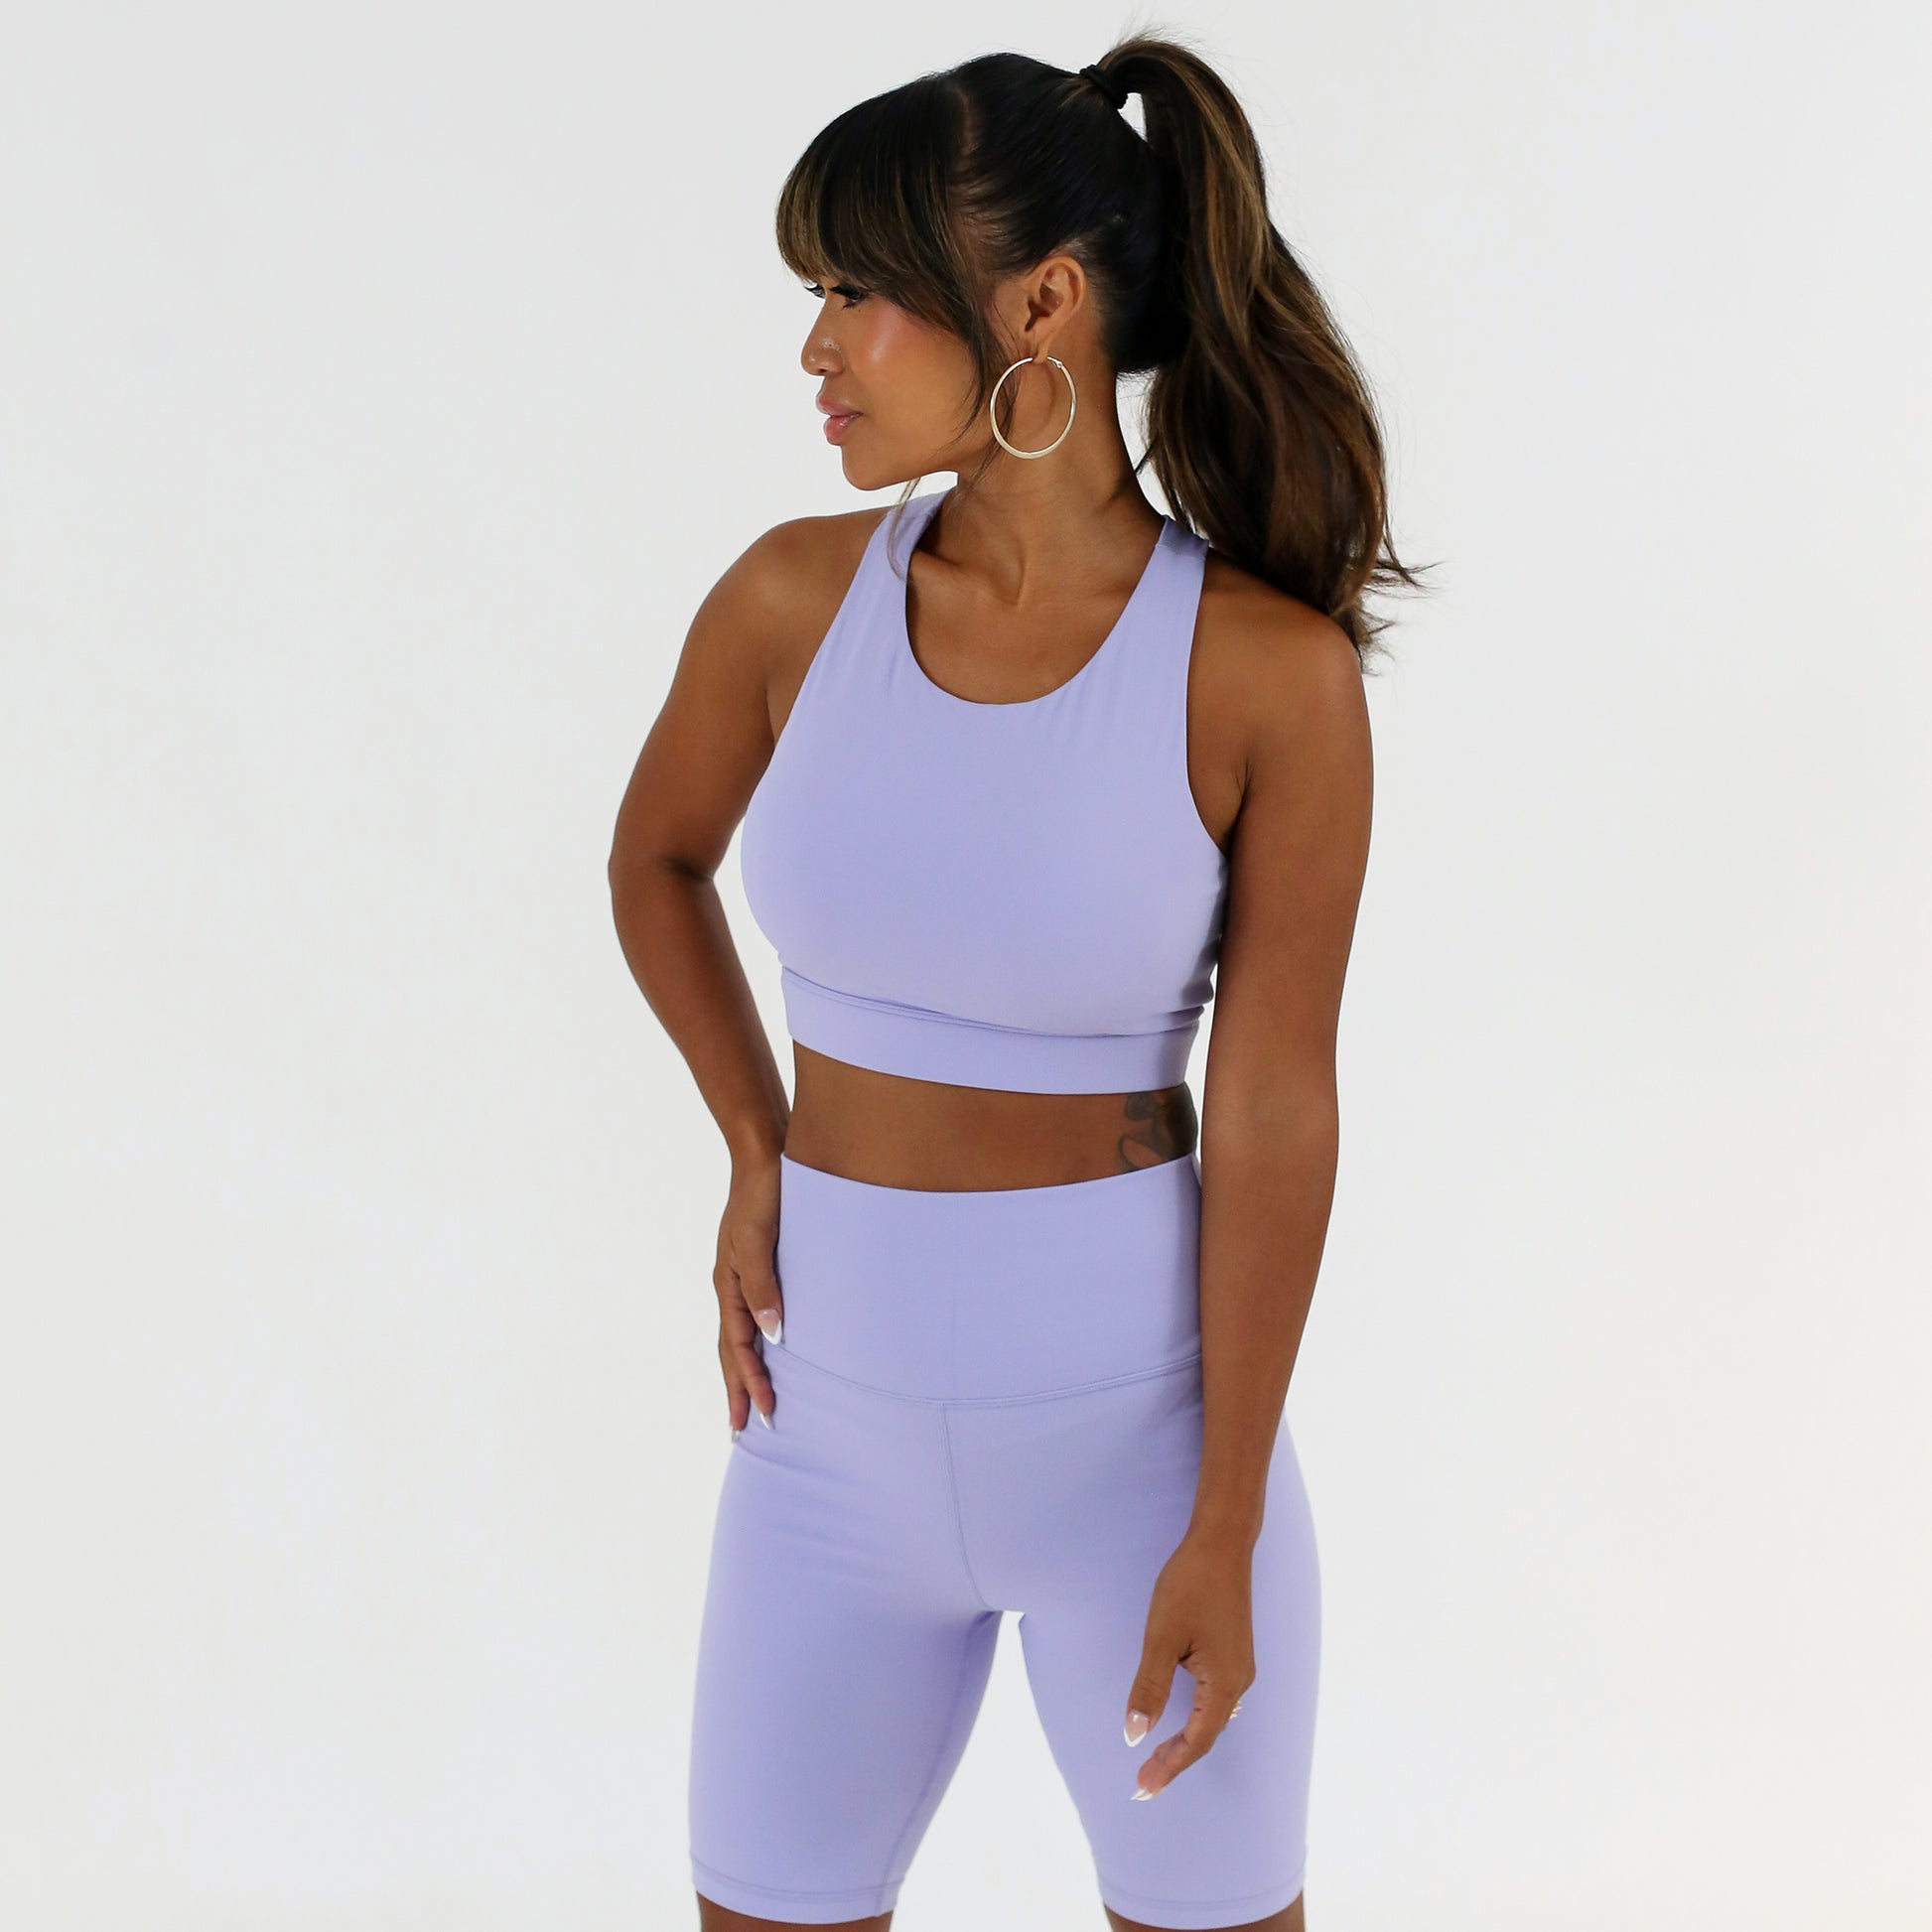 Unleash your strength and style with our high impact sports bra